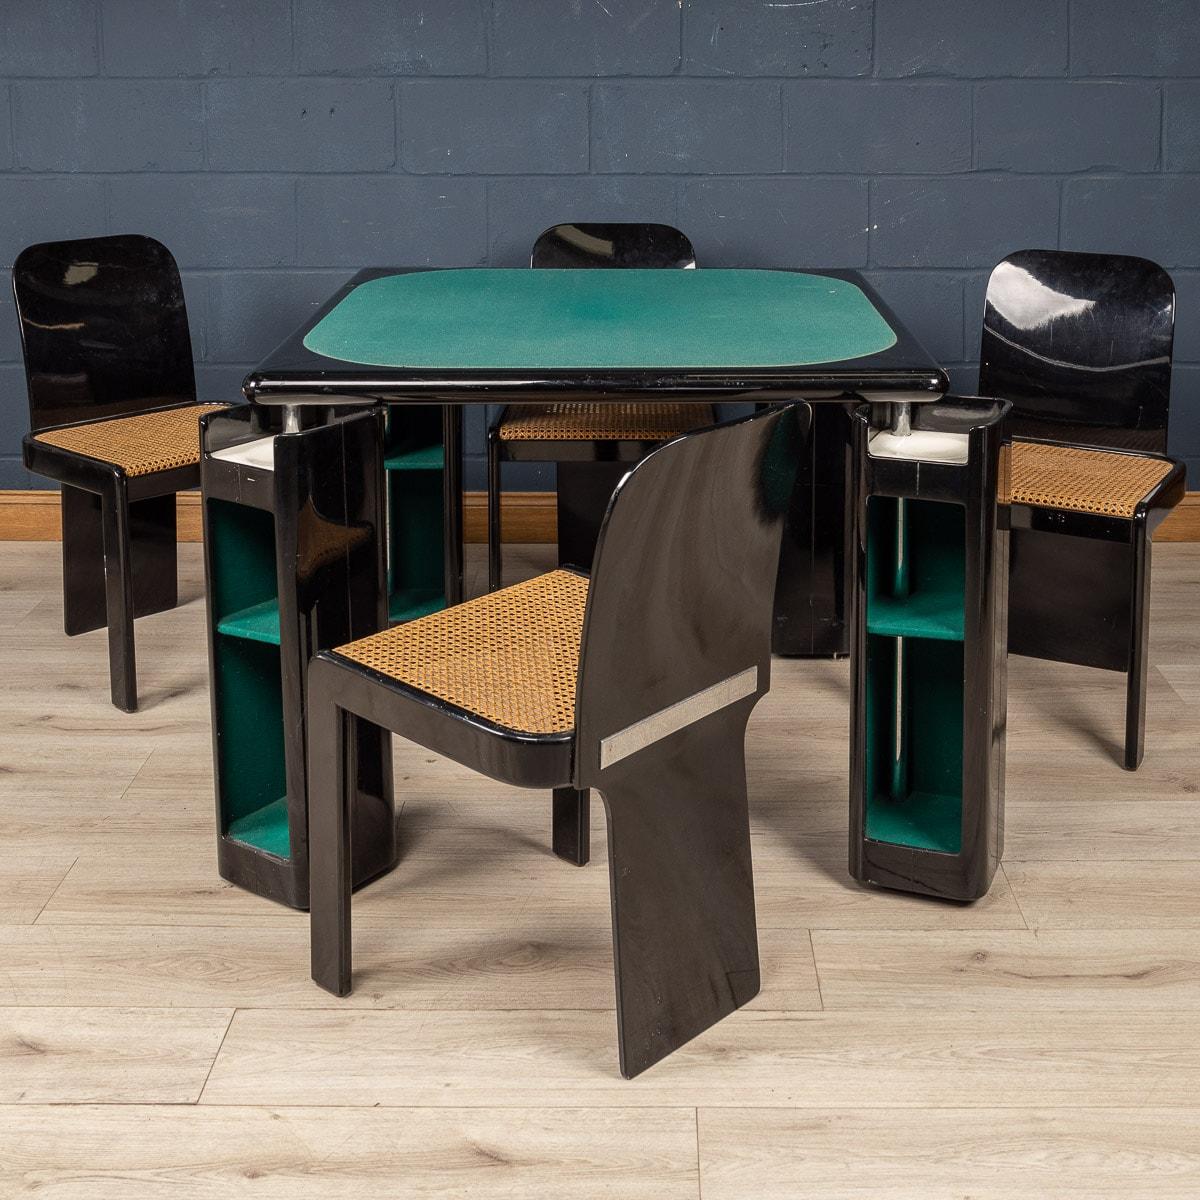 Lacquered Wood Games Table & Chairs by Pierluigi Molinari for Pozzi, Milan In Good Condition In Royal Tunbridge Wells, Kent